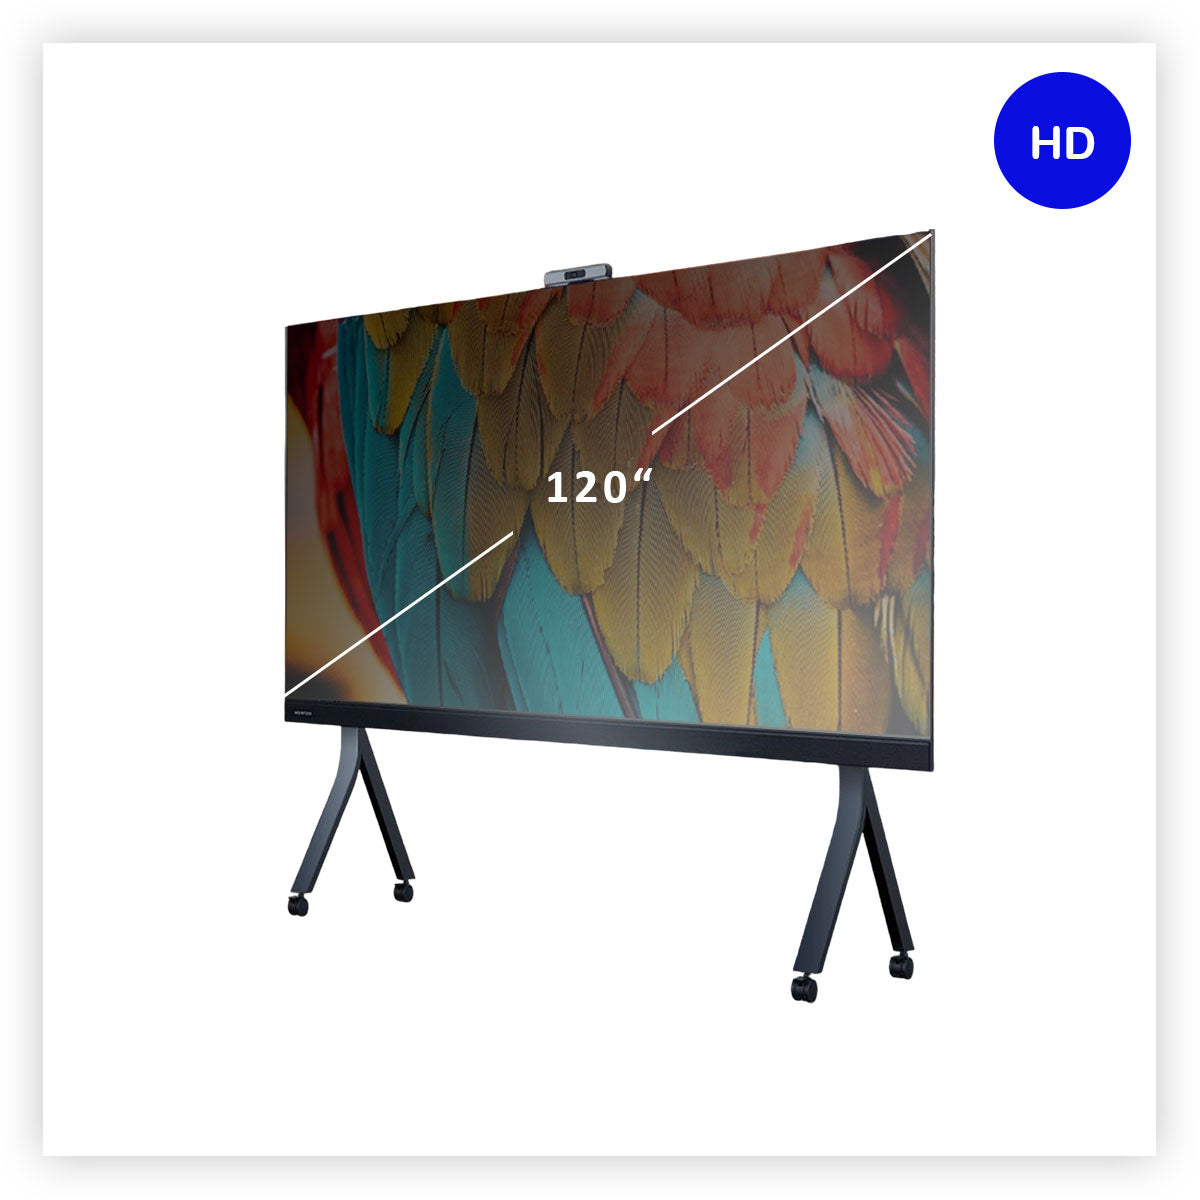 Majestic All-in-One HD 120" P2.08mm